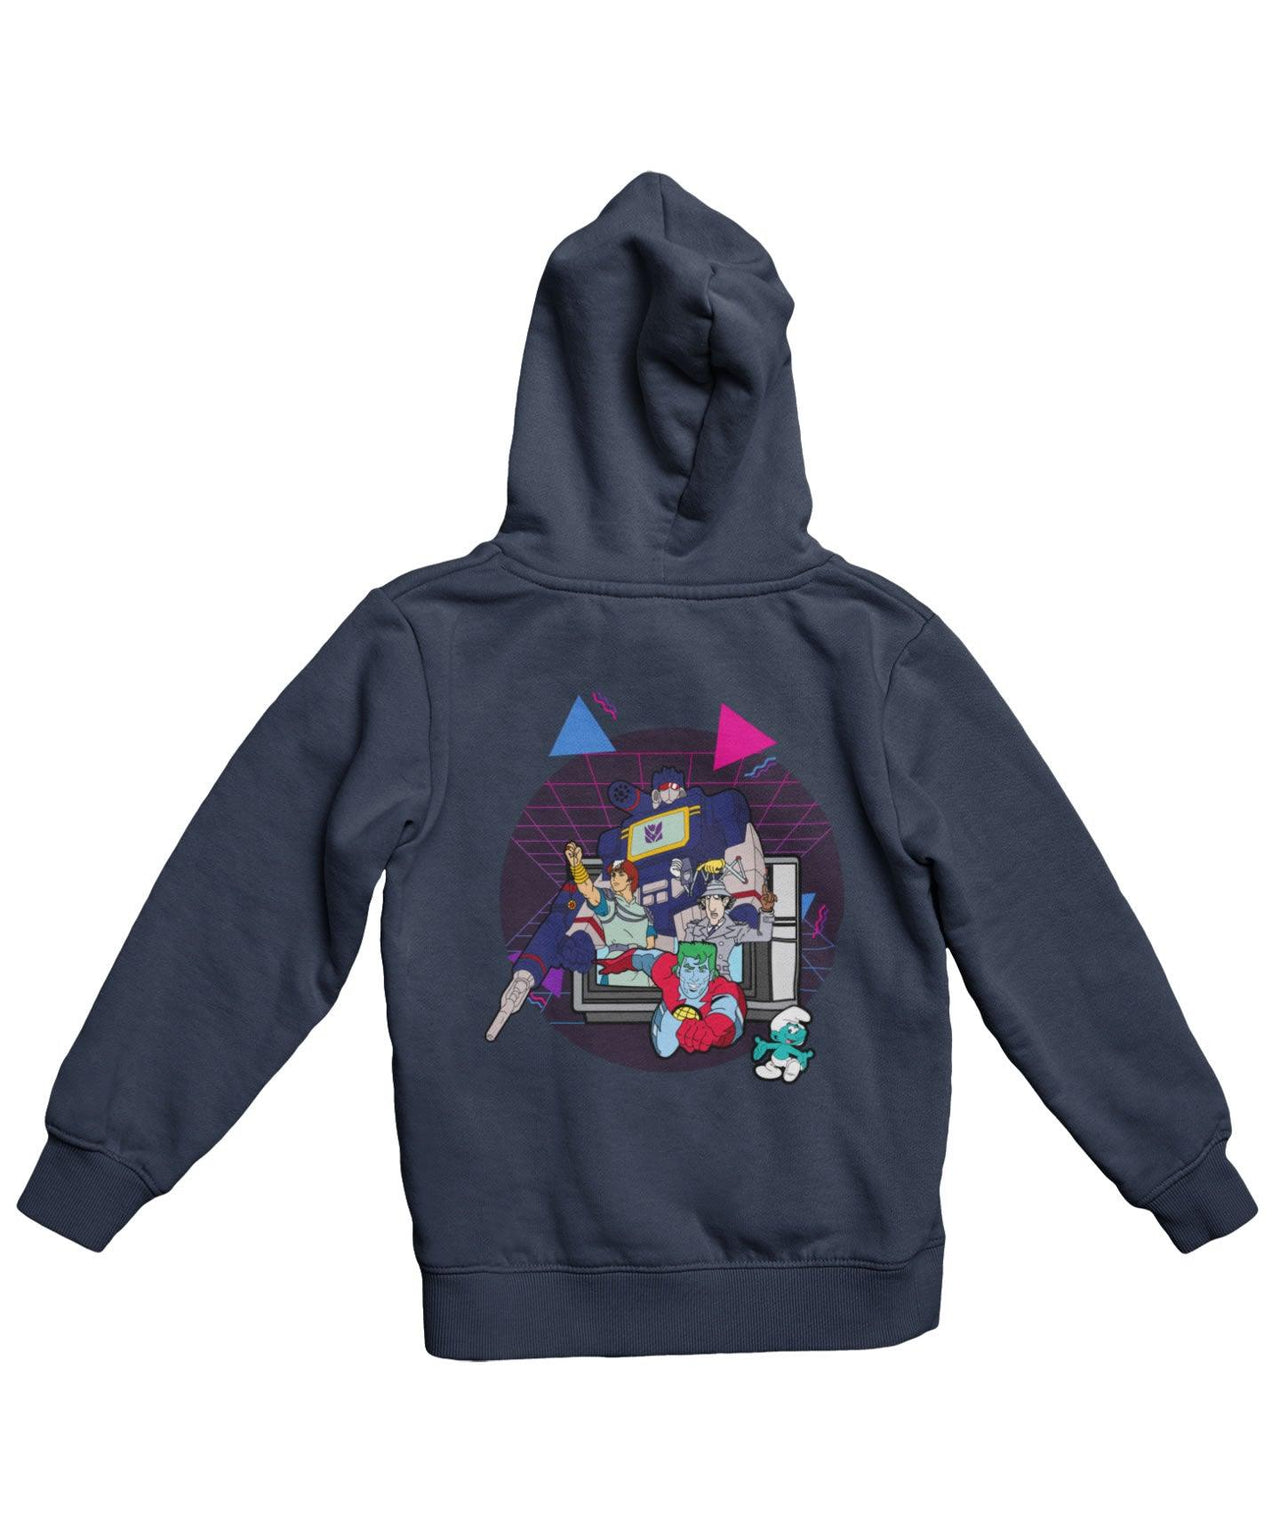 Top Notchy TV Toon Number 1 Back Printed Graphic Hoodie 8Ball